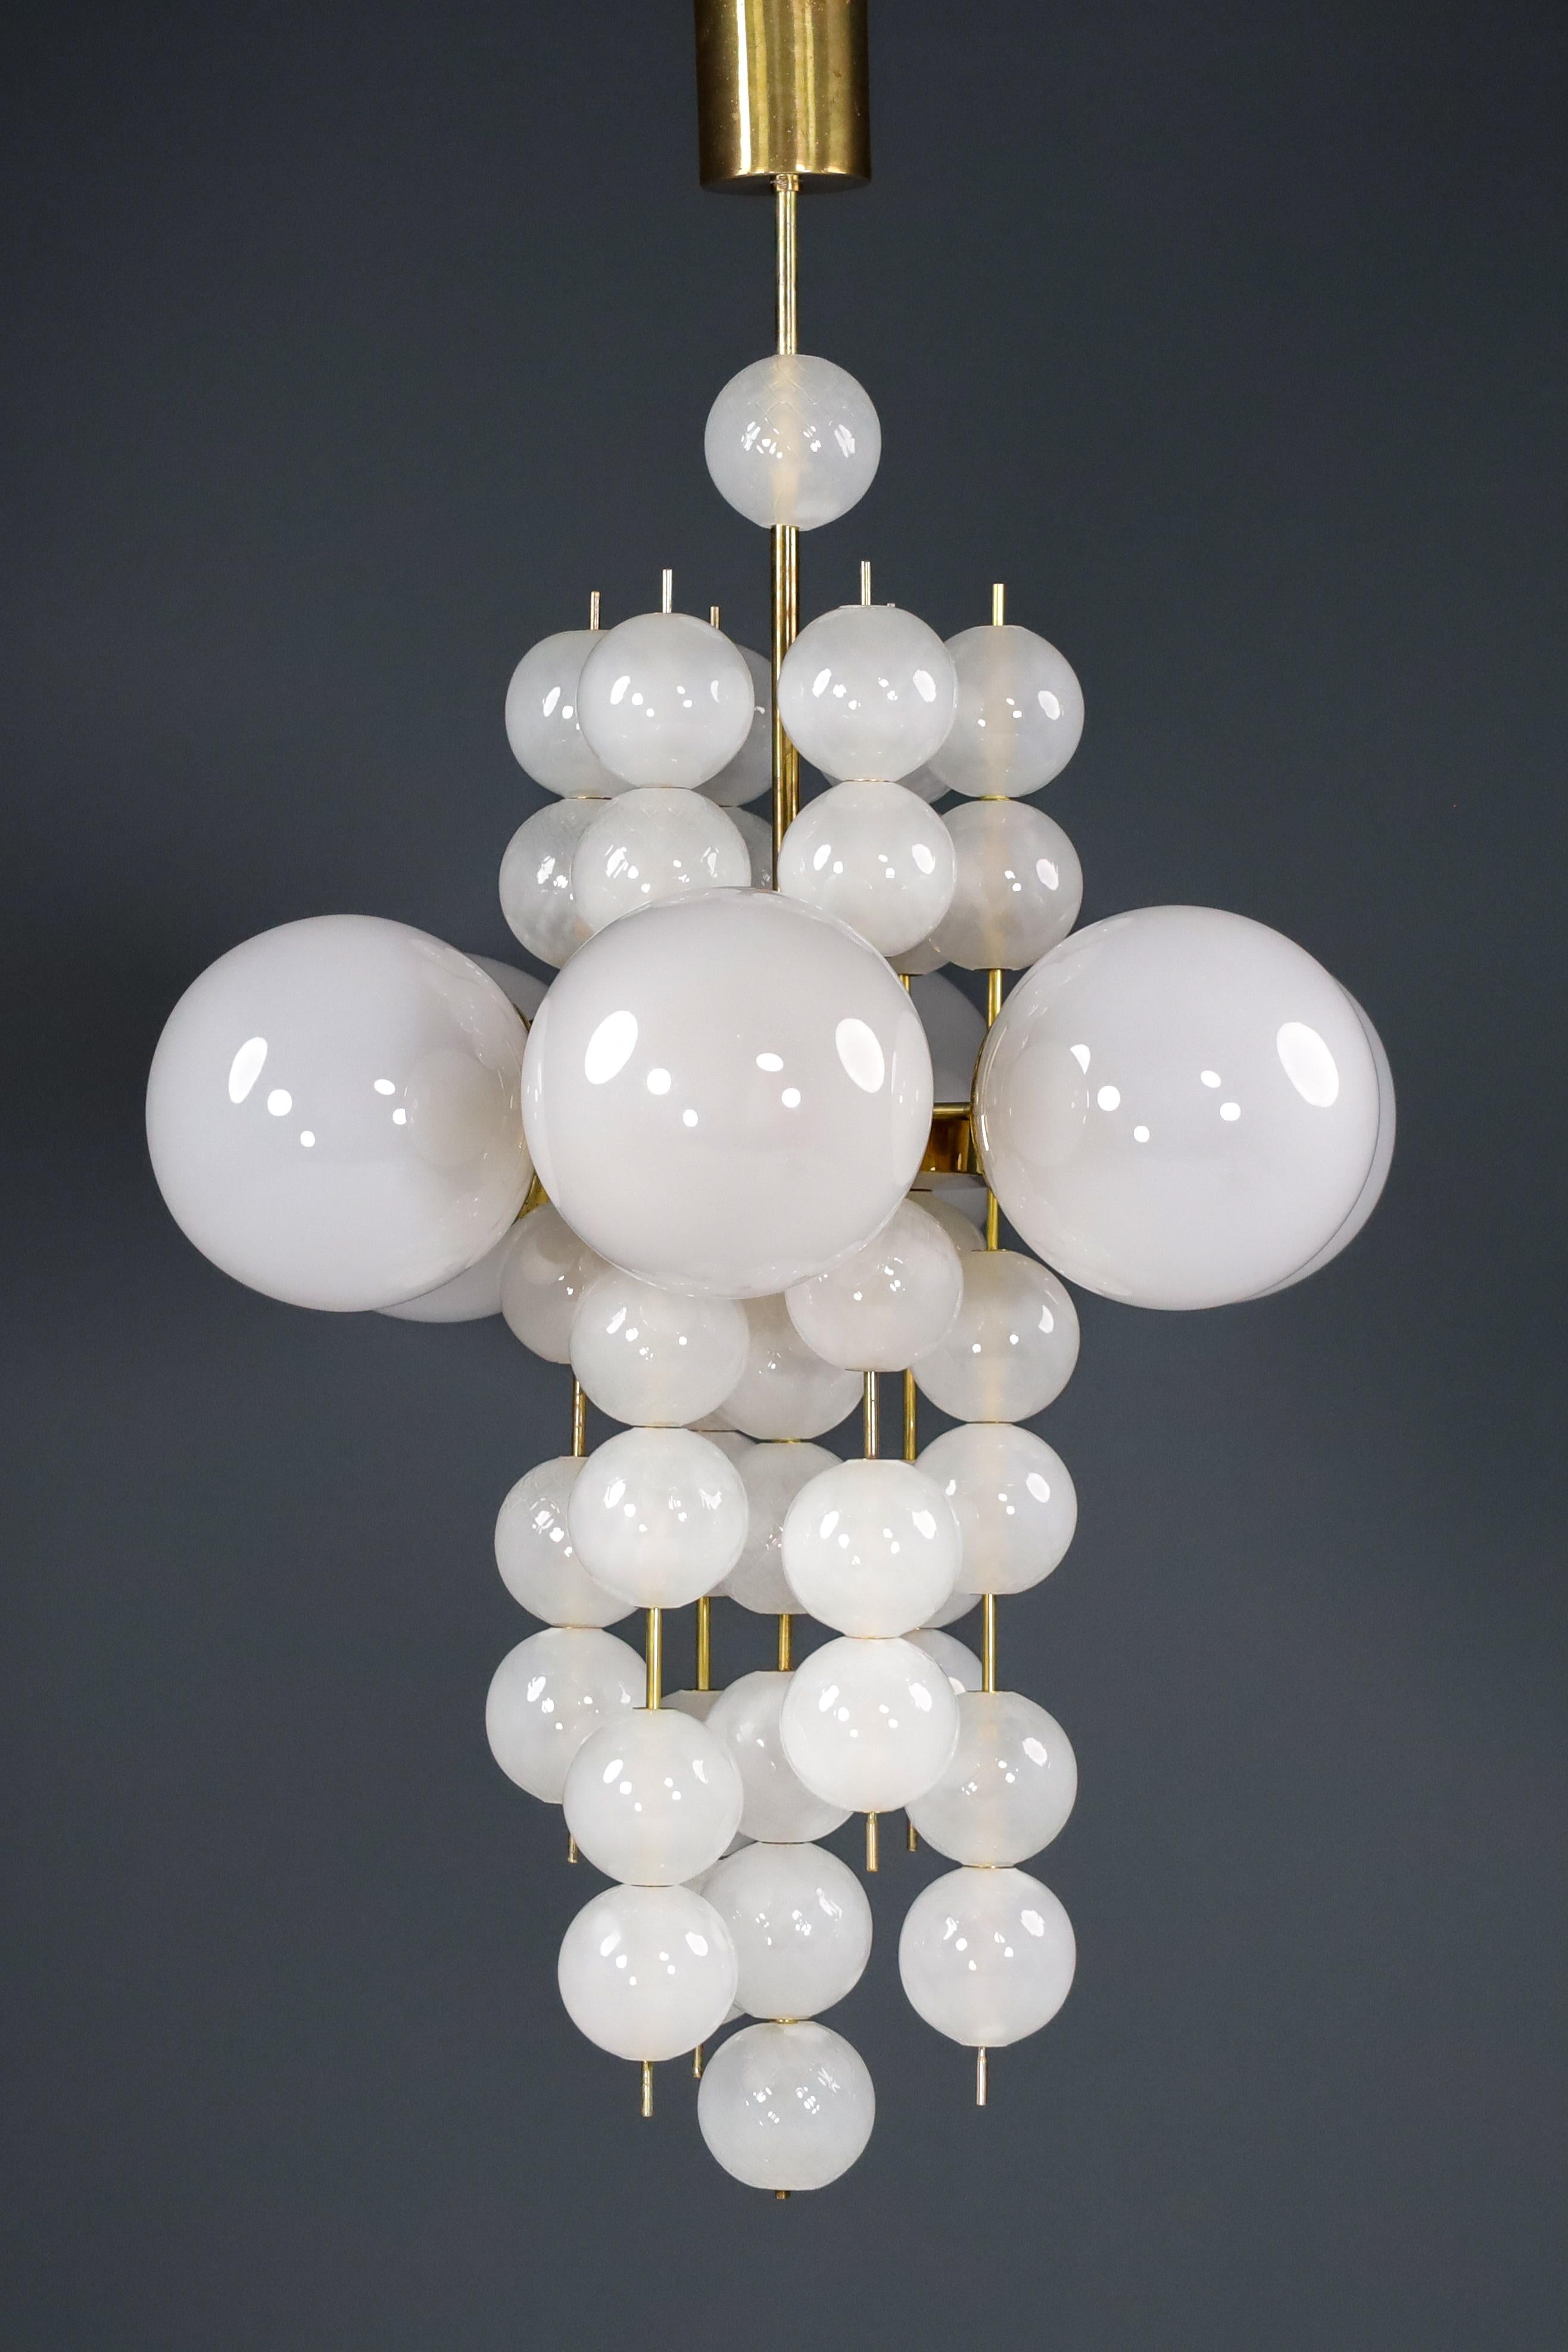 XL Hotel Chandelier with Brass Fixture and Hand-Blowed Frosted Glass Globes For Sale 6